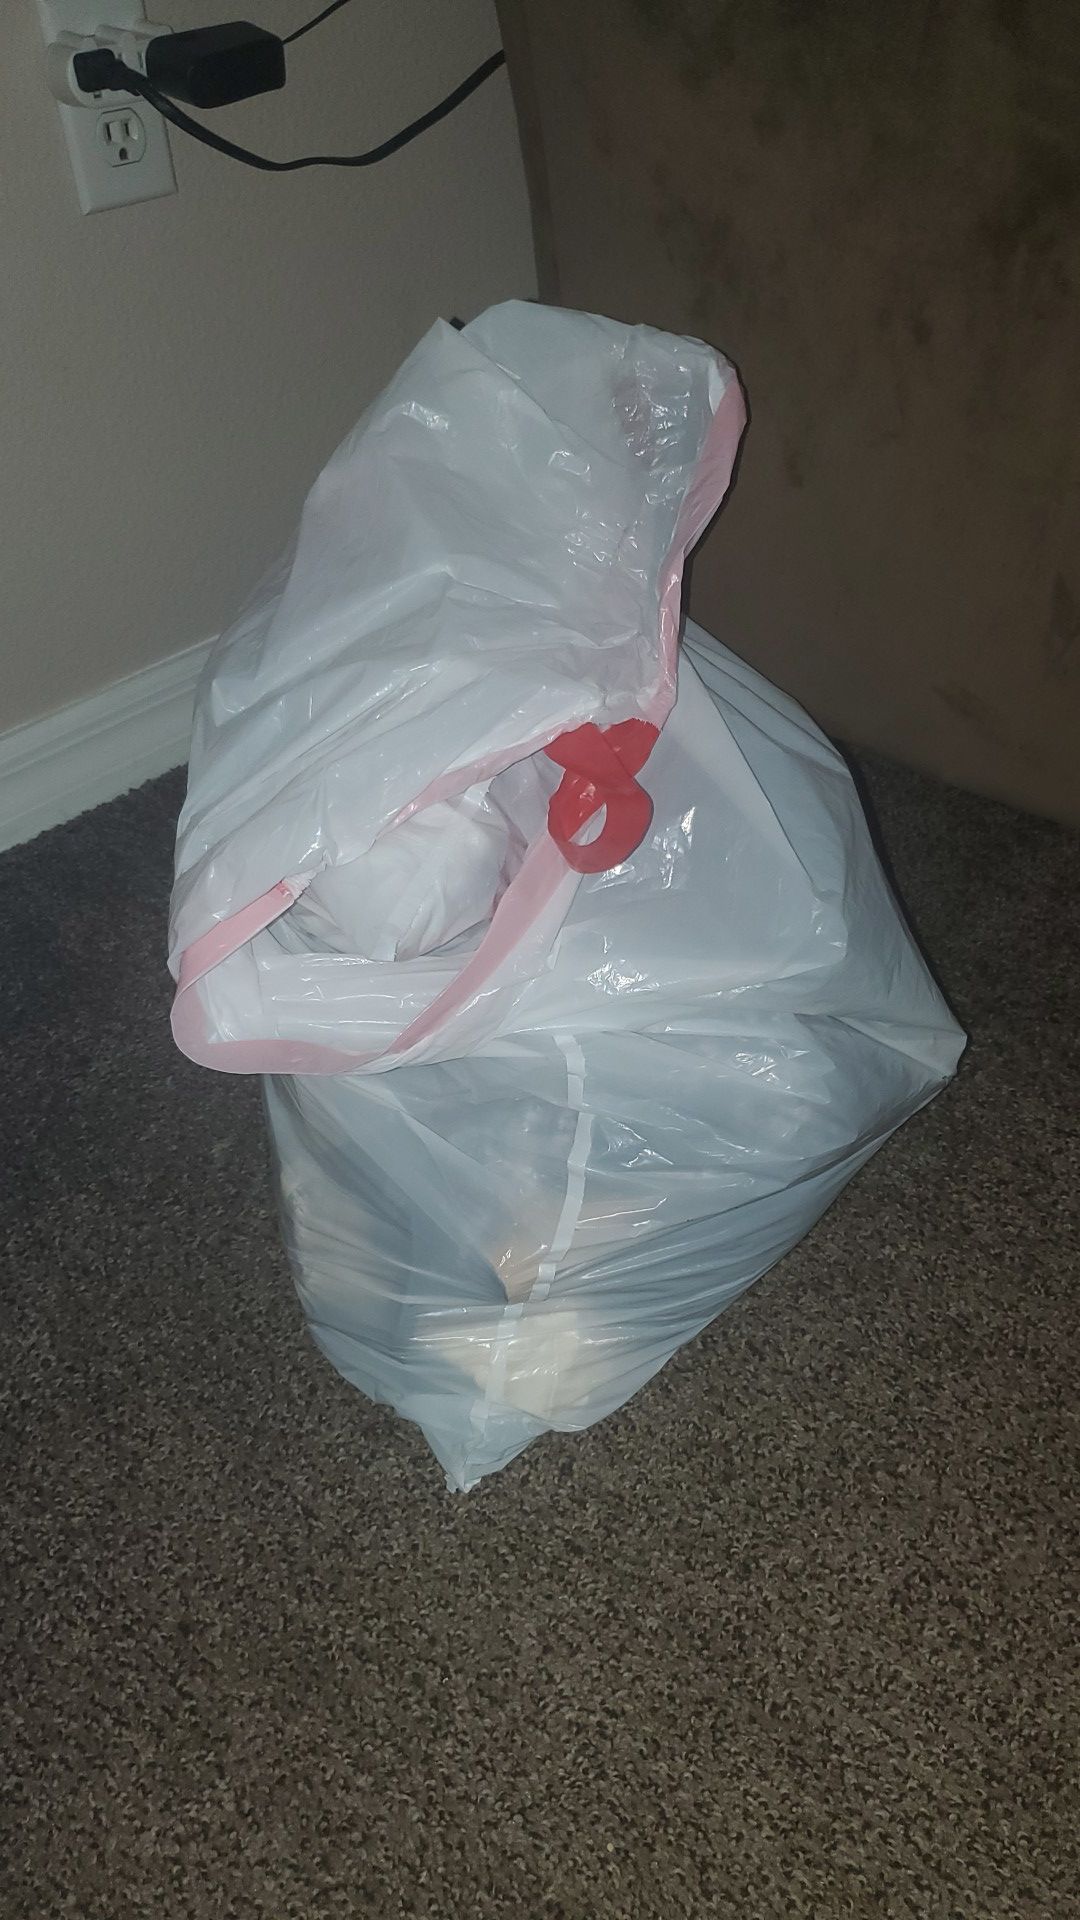 Free purses clothes and more